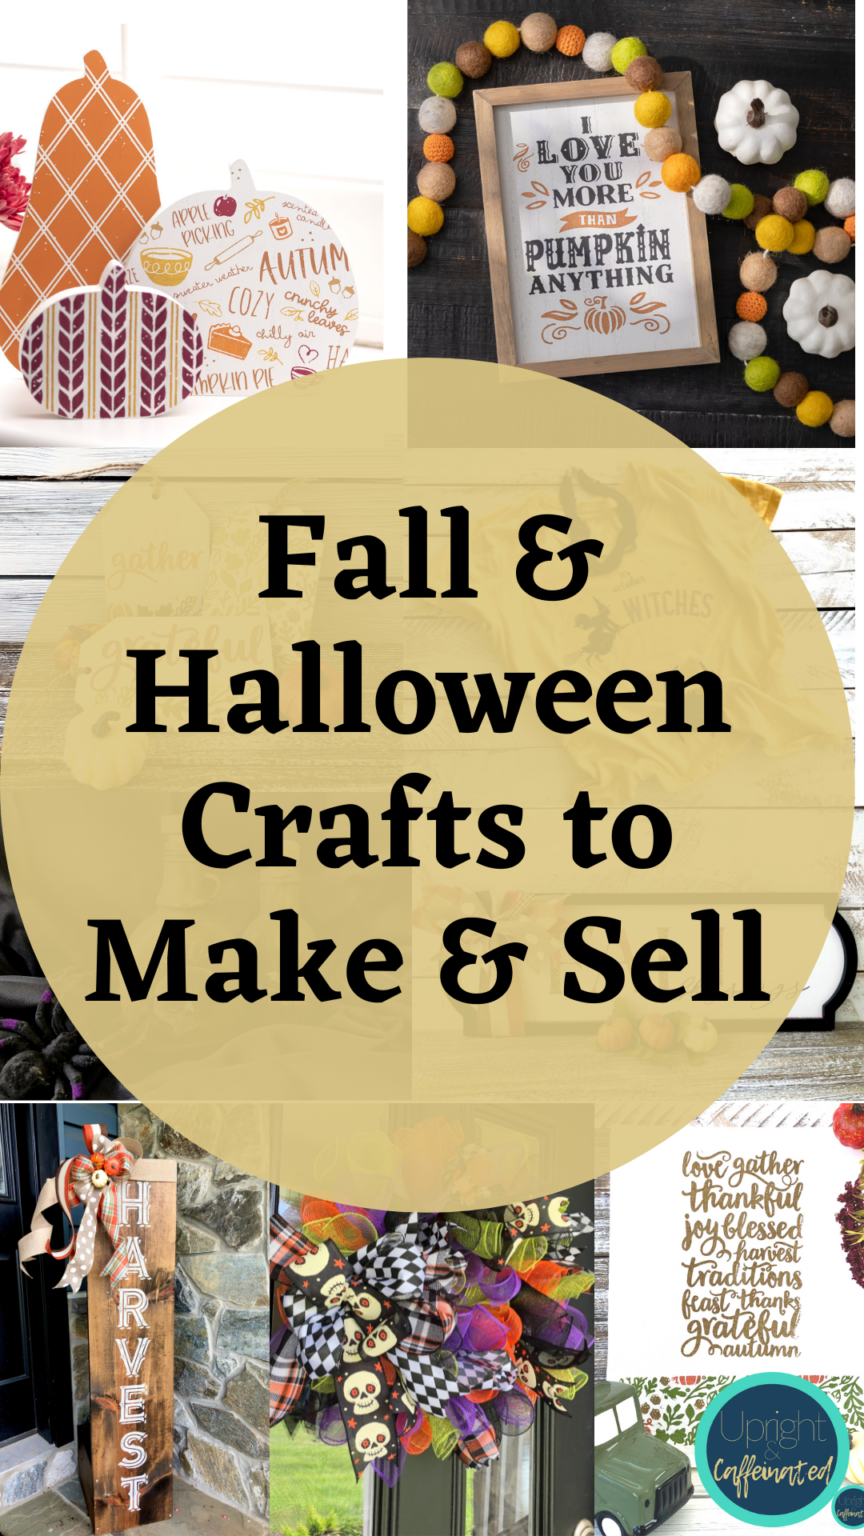 Fall and Halloween Crafts to Make and Sell - Upright and Caffeinated